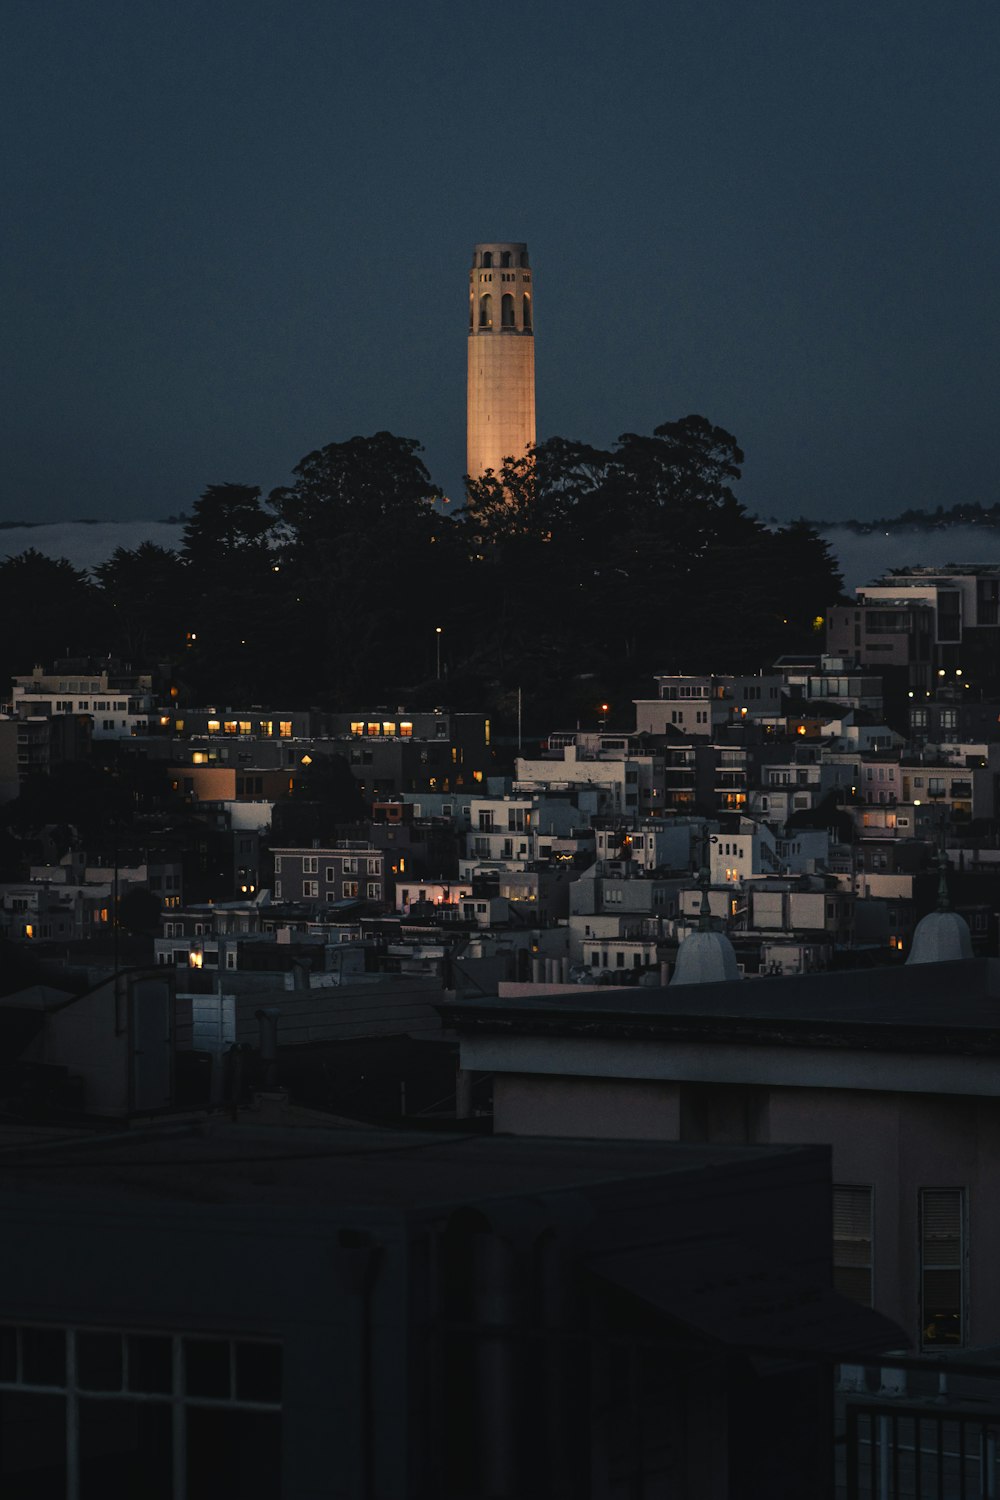 a very tall clock tower towering over a city